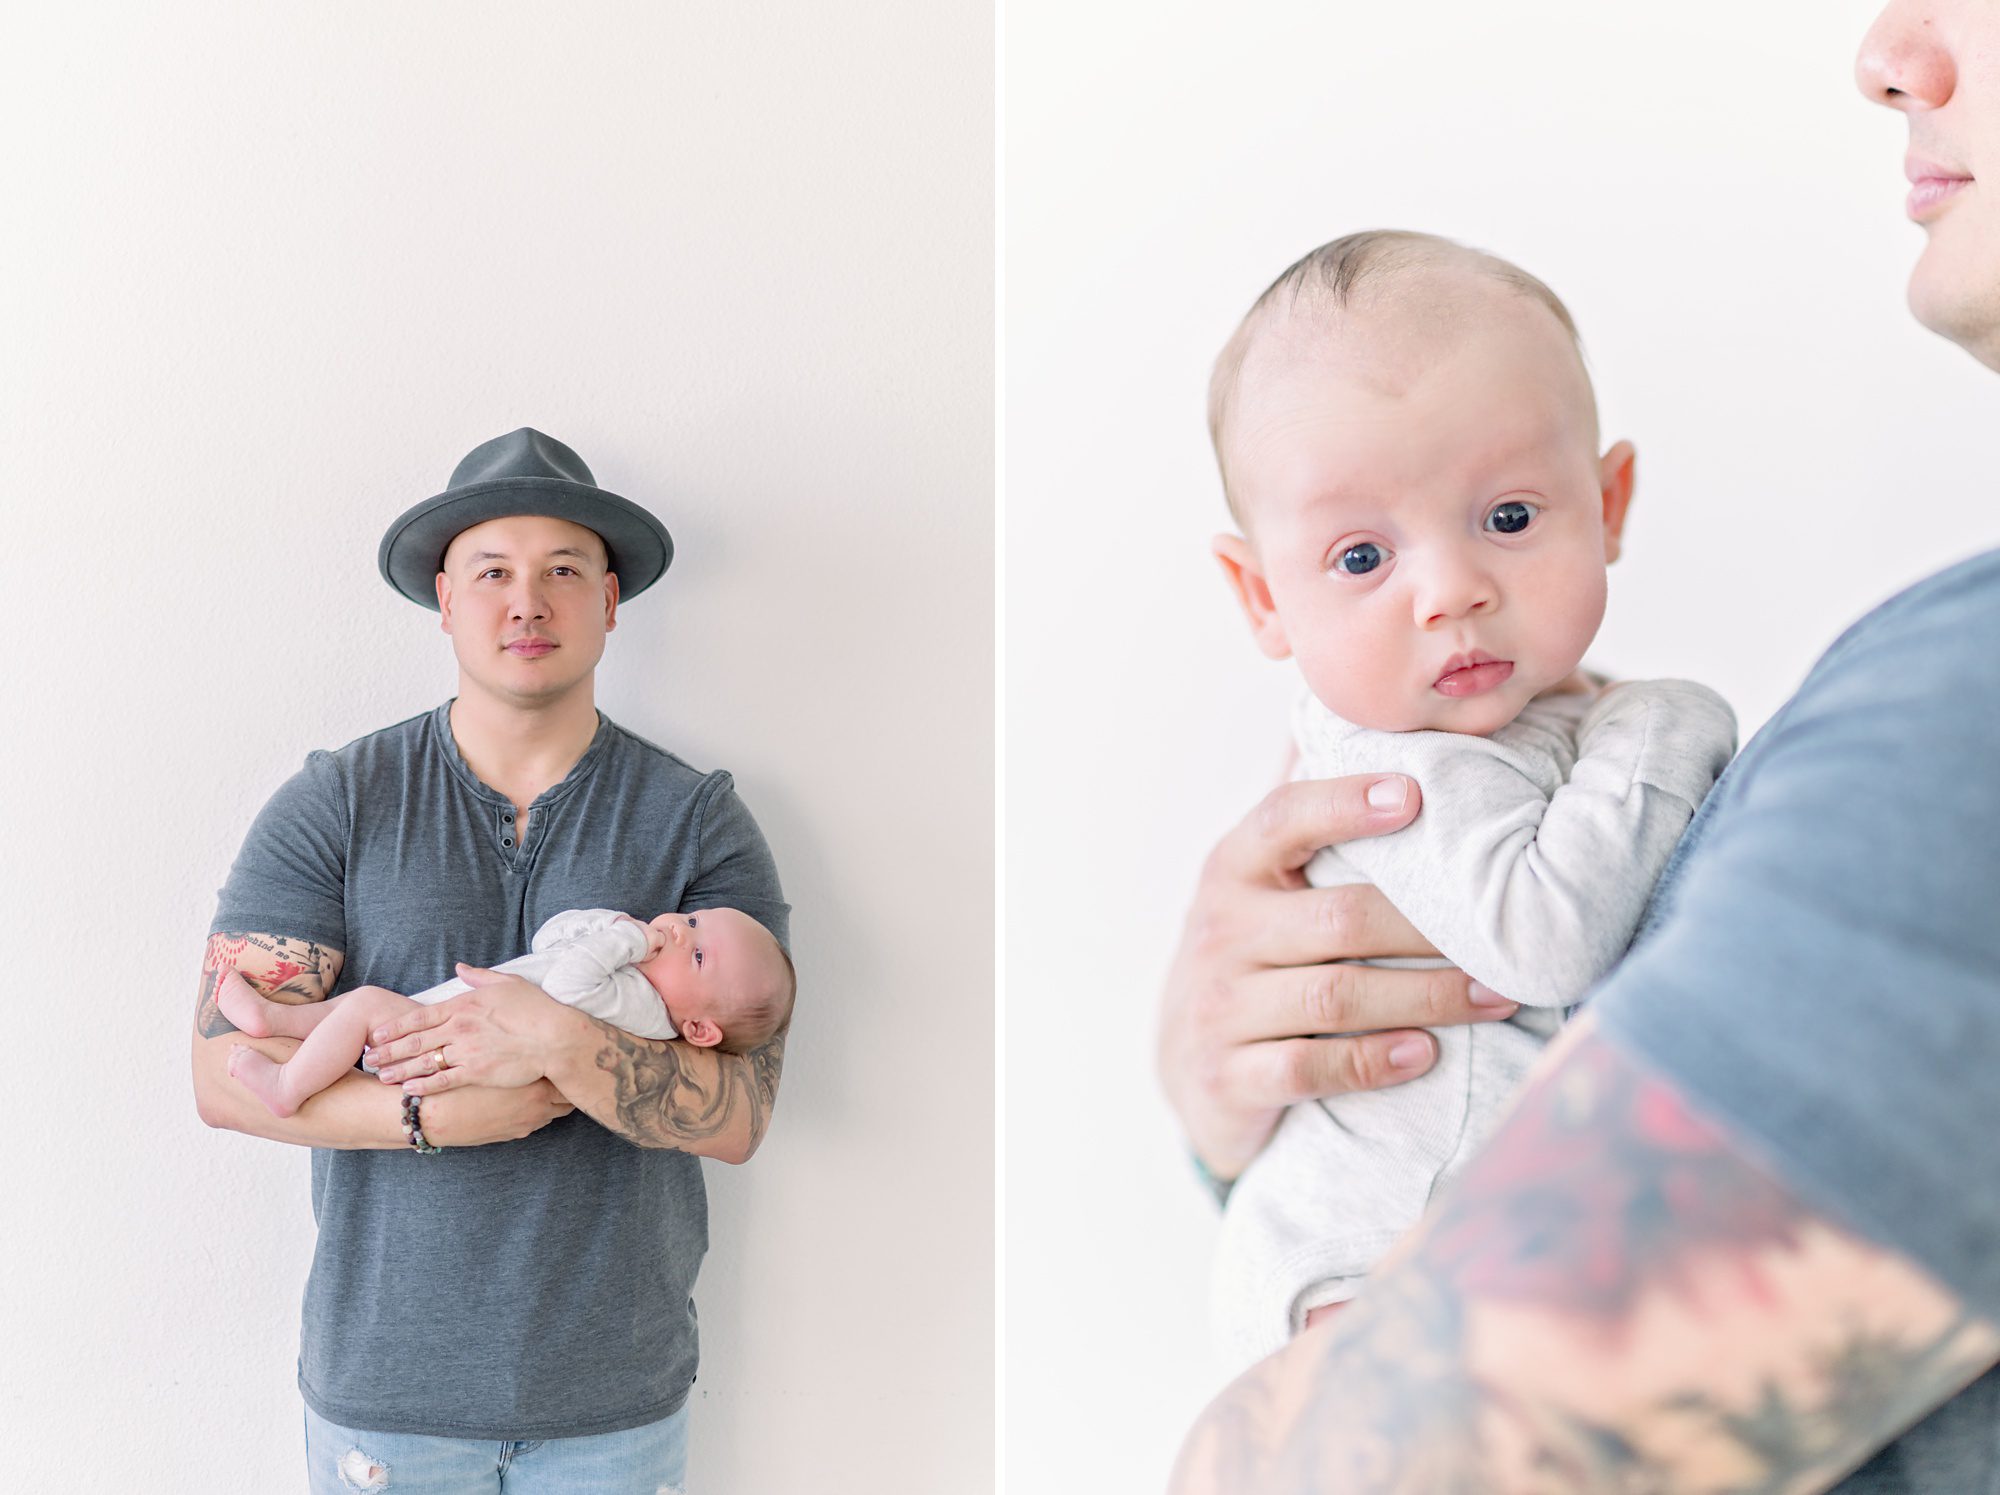 As a new family of 4, these parents get light and airy newborn photos done with their two boys in a bright white studio in Denver Colorado.